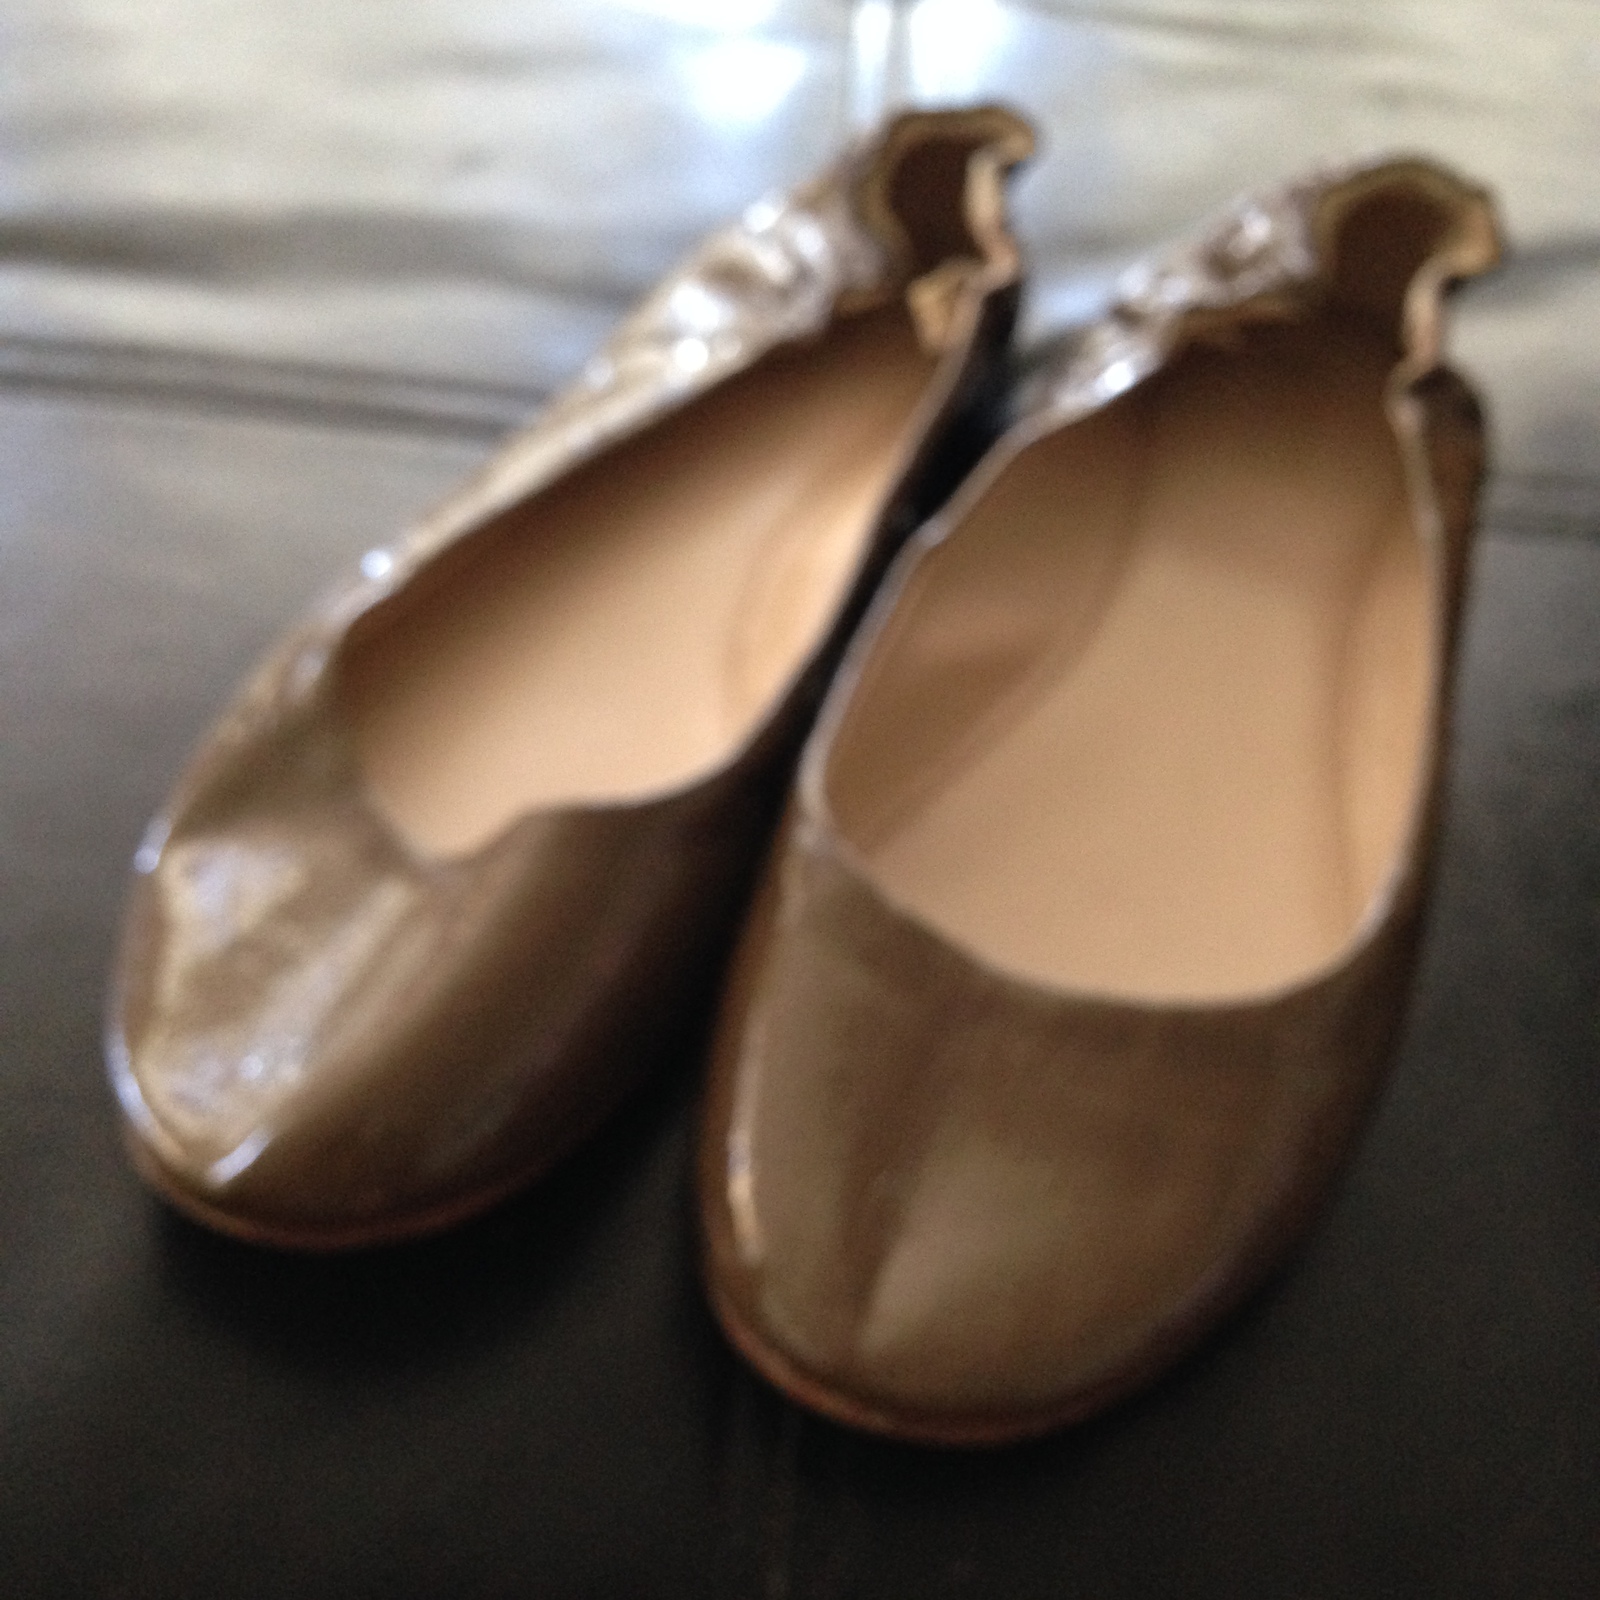 Women's shoes by Mossimo Supply Co size 8 and 14 similar items